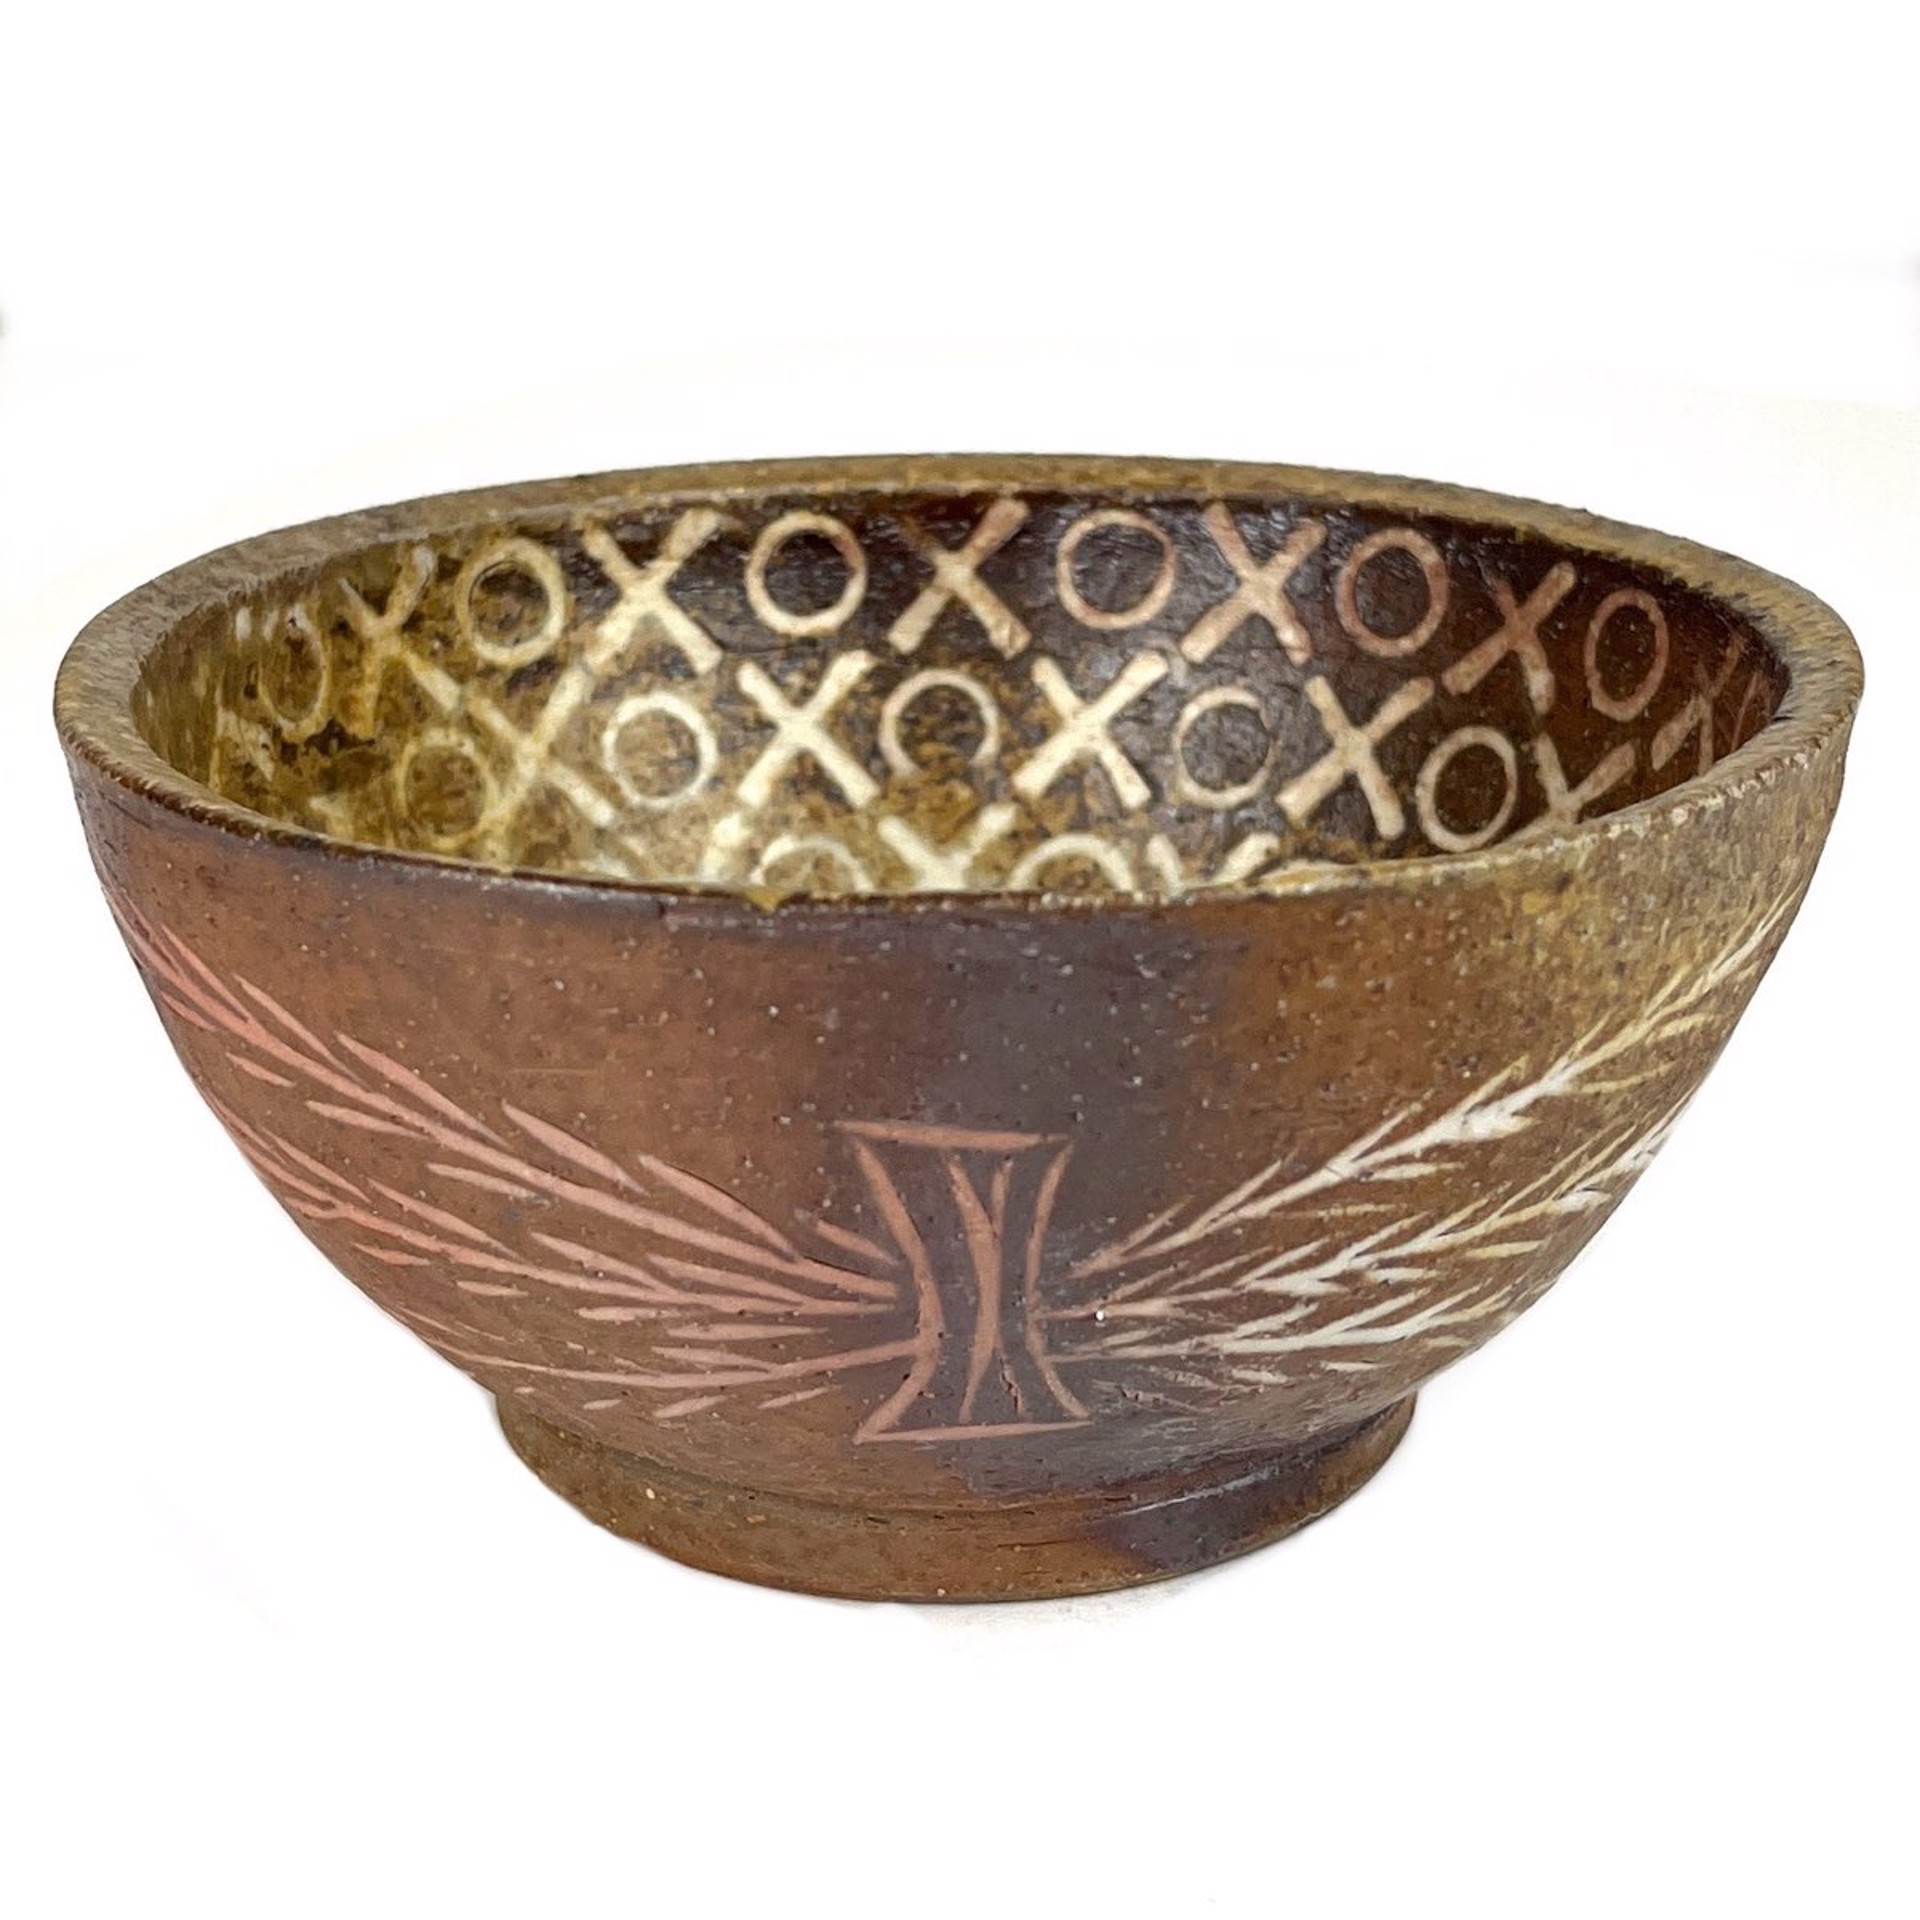 Wood-Fired Bowl by Mitch Yung